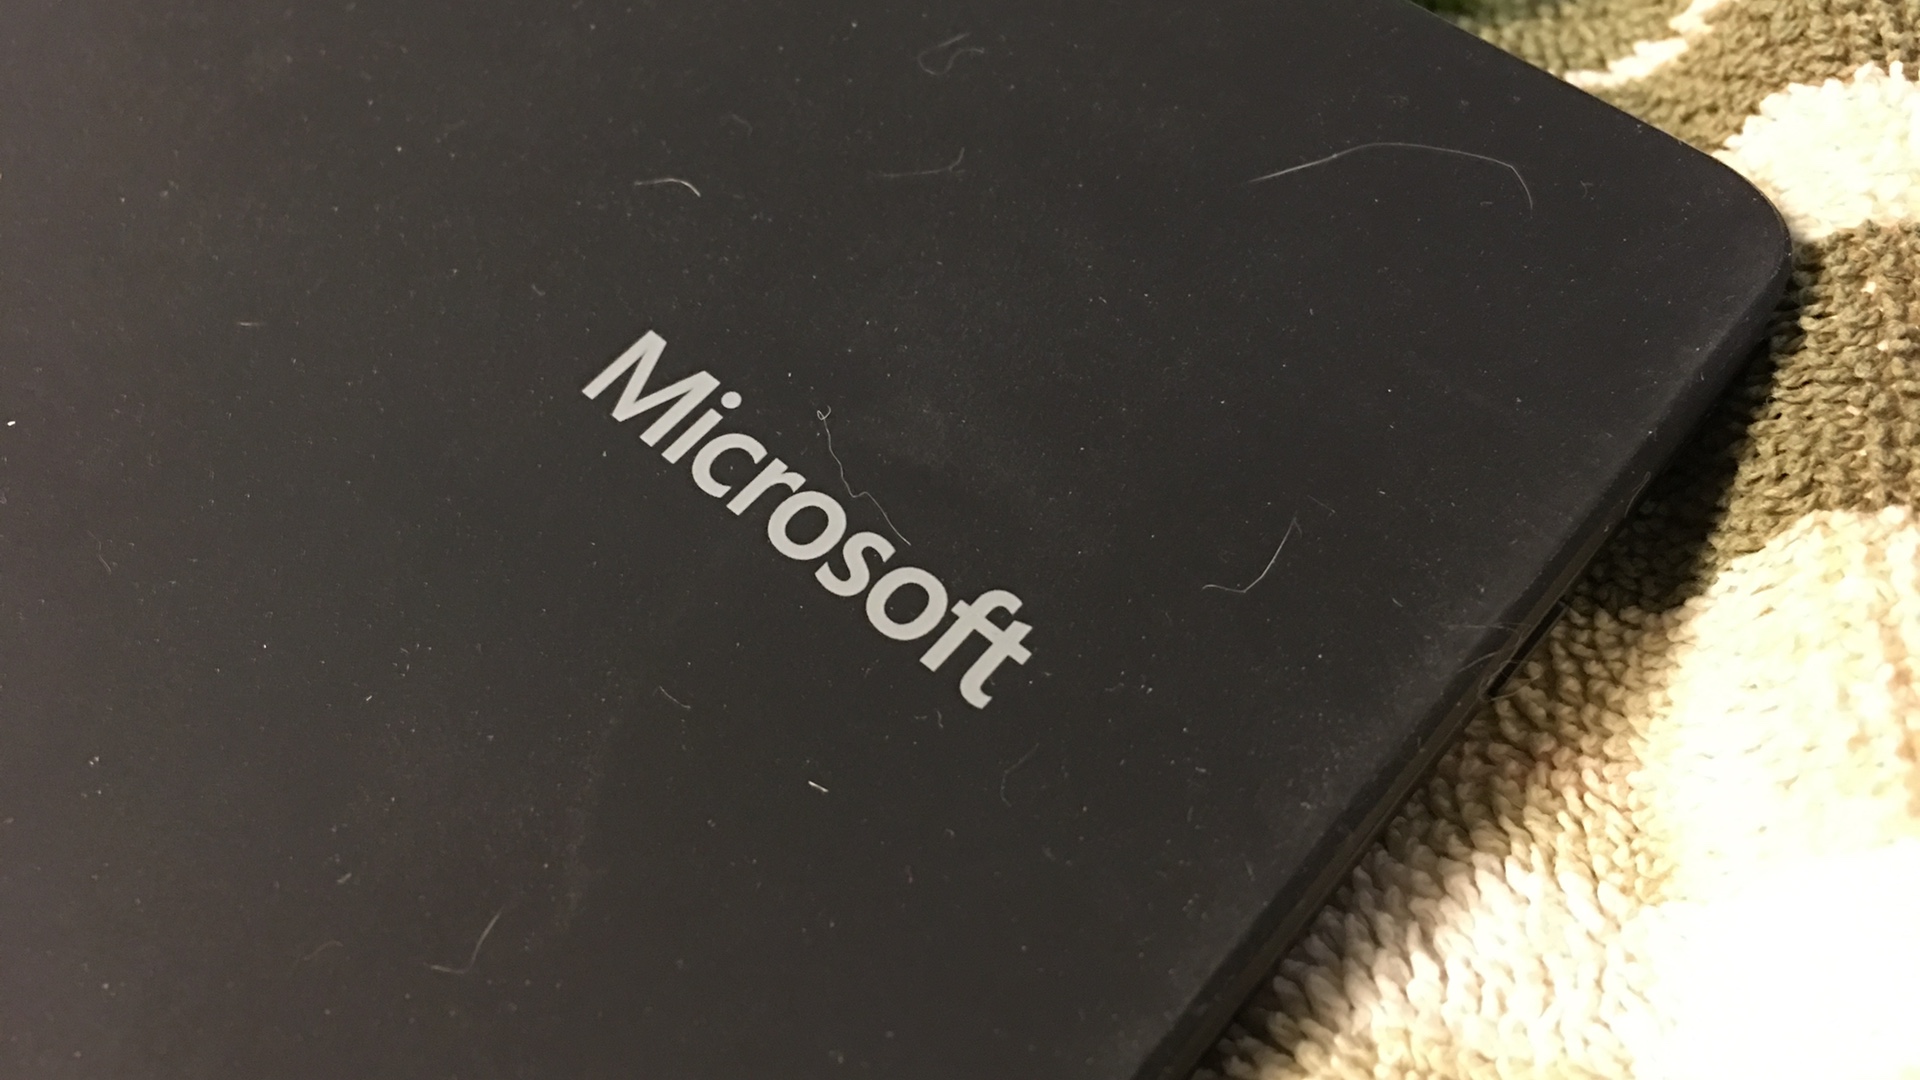 Microsoft Universal Mobile Keyboard attracts dirts